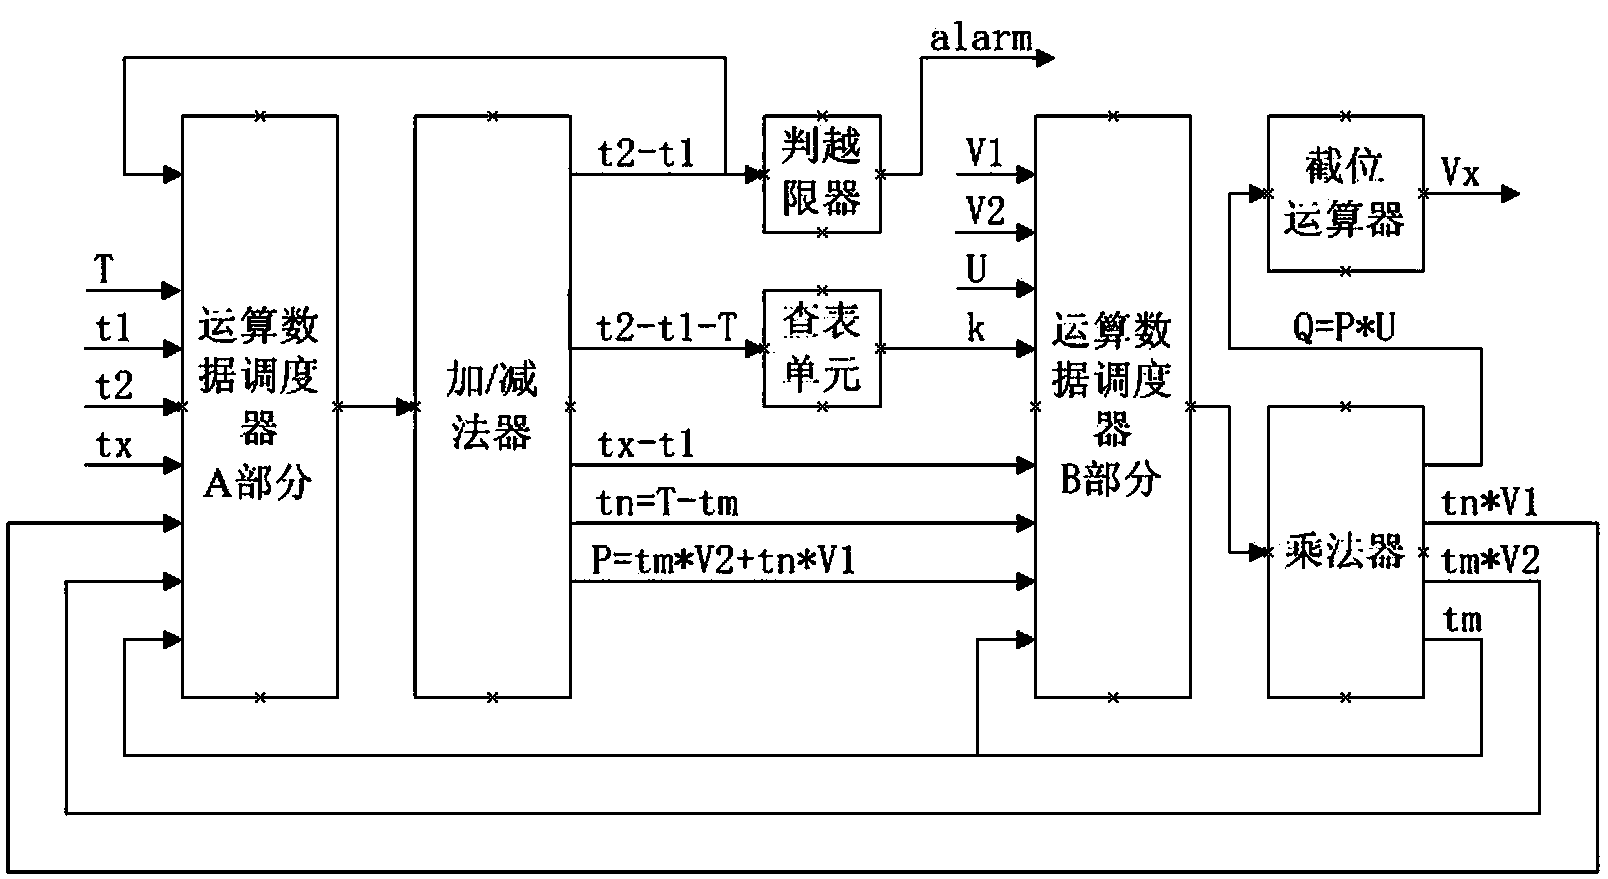 Sampling value linear interpolation calculation device based on FPGA (Field Programmable Gate Array) and calculation method